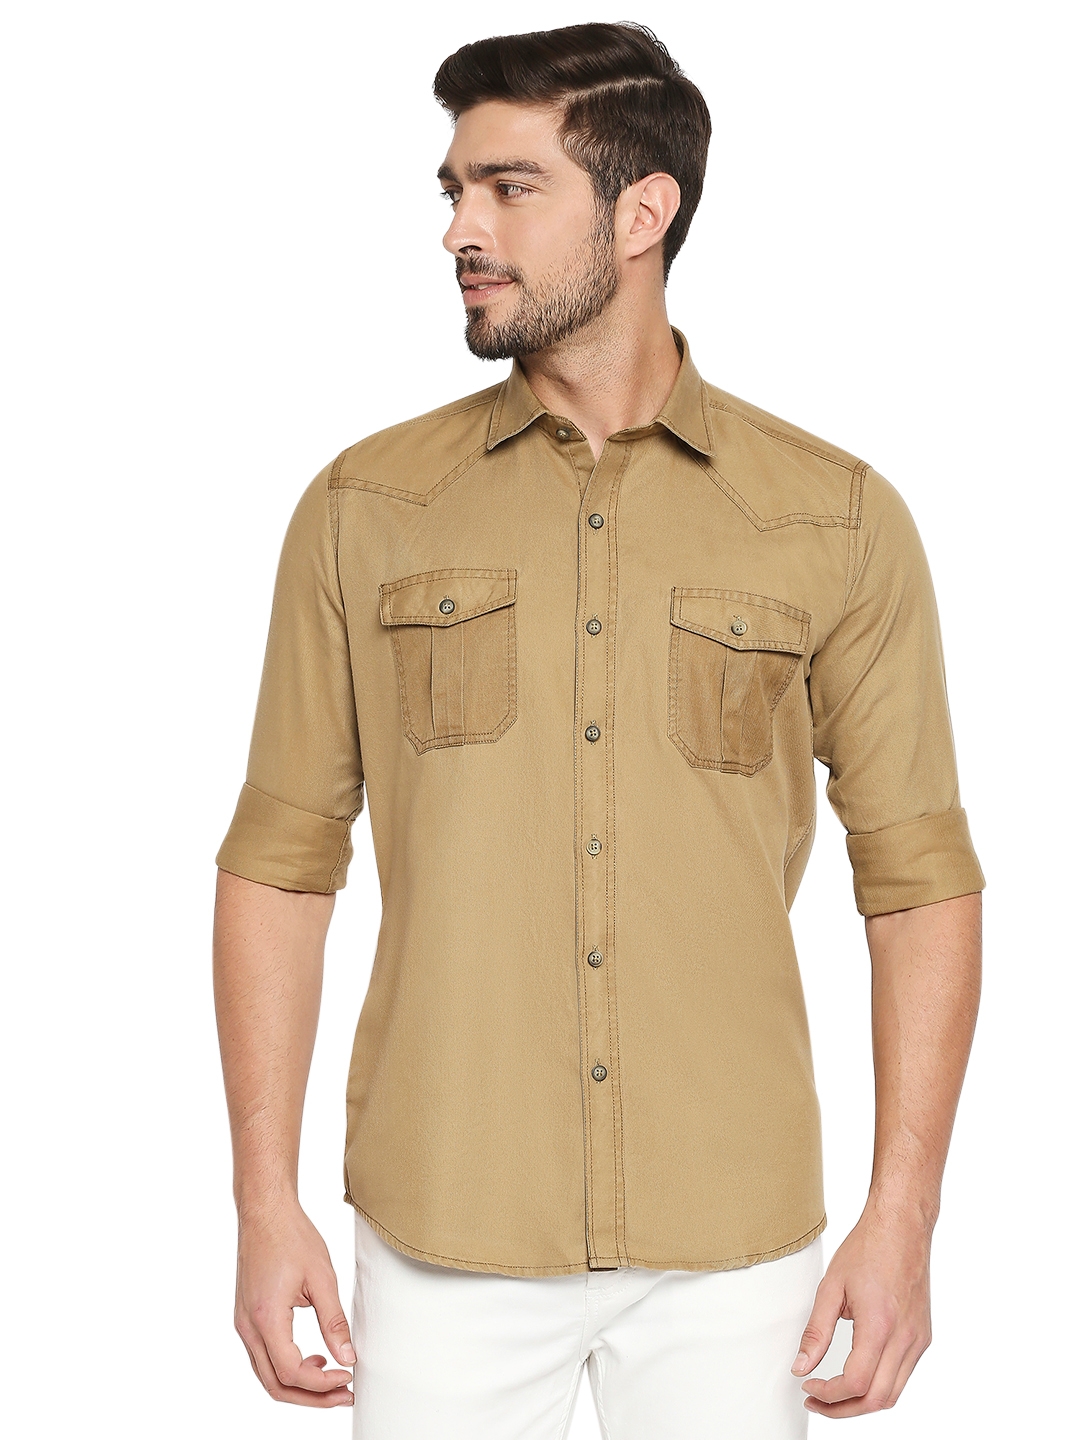 EVOQ | EVOQ Full Sleeves Solid Cotton Brown Casual Shirt